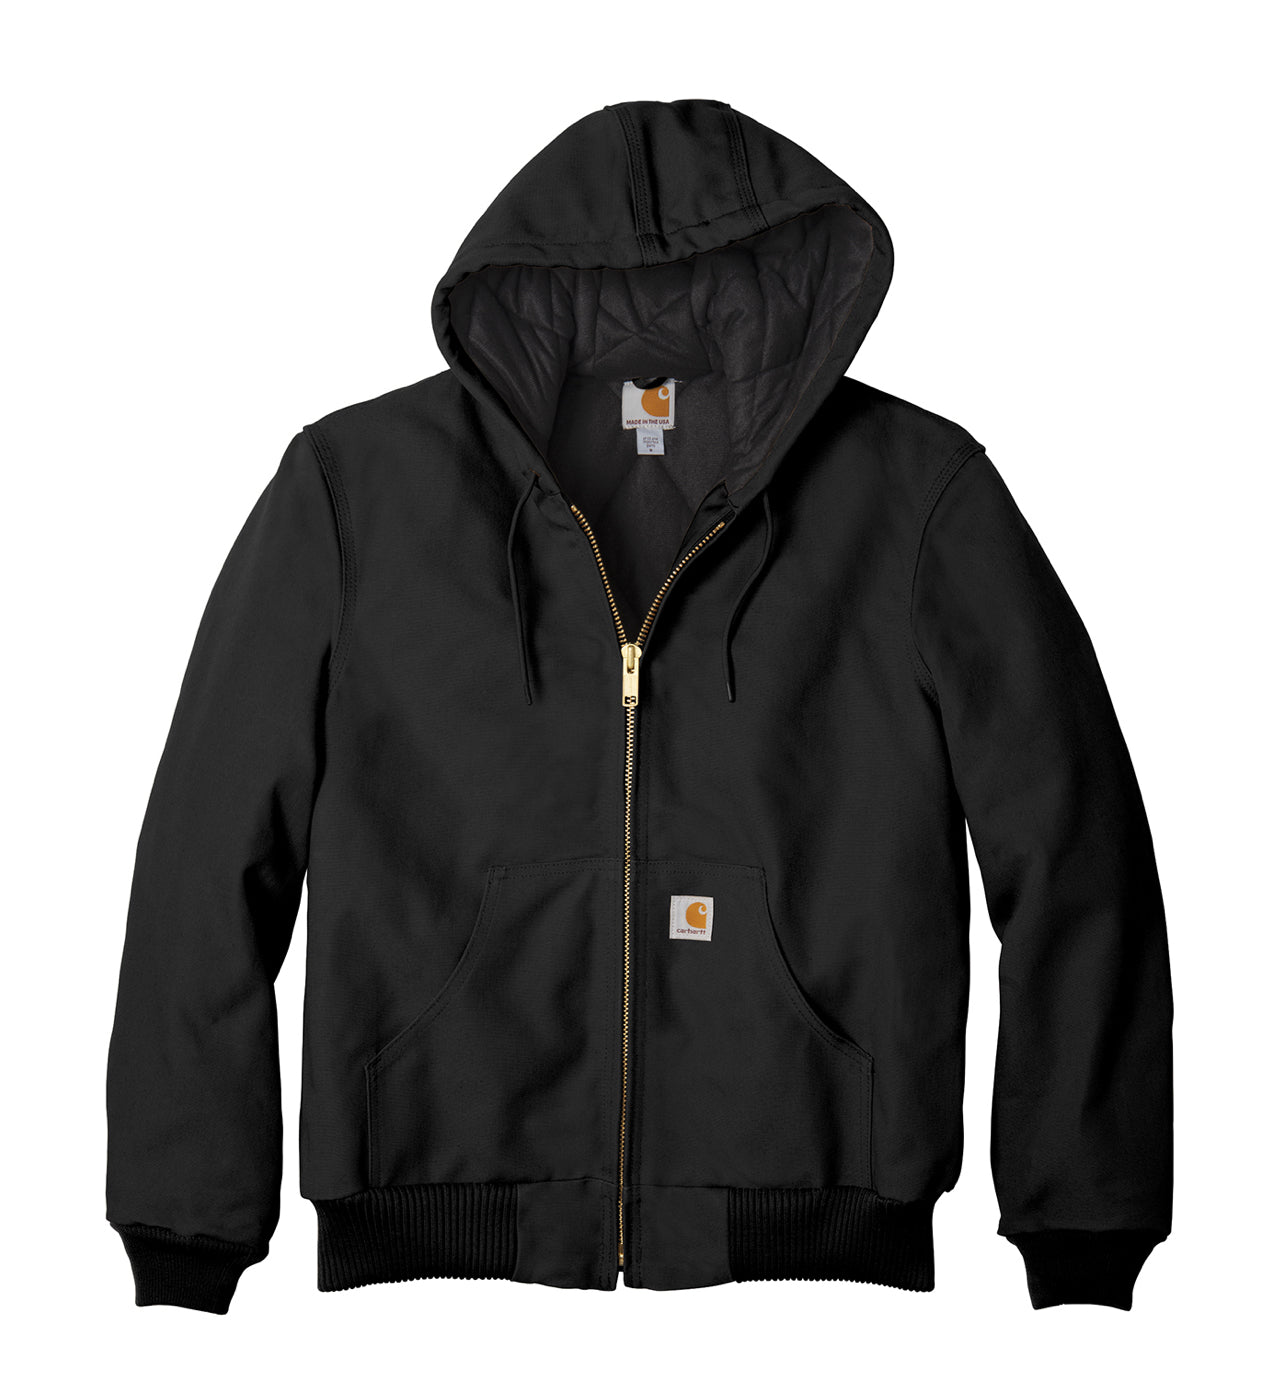 Project Airtime Carhartt Jacket